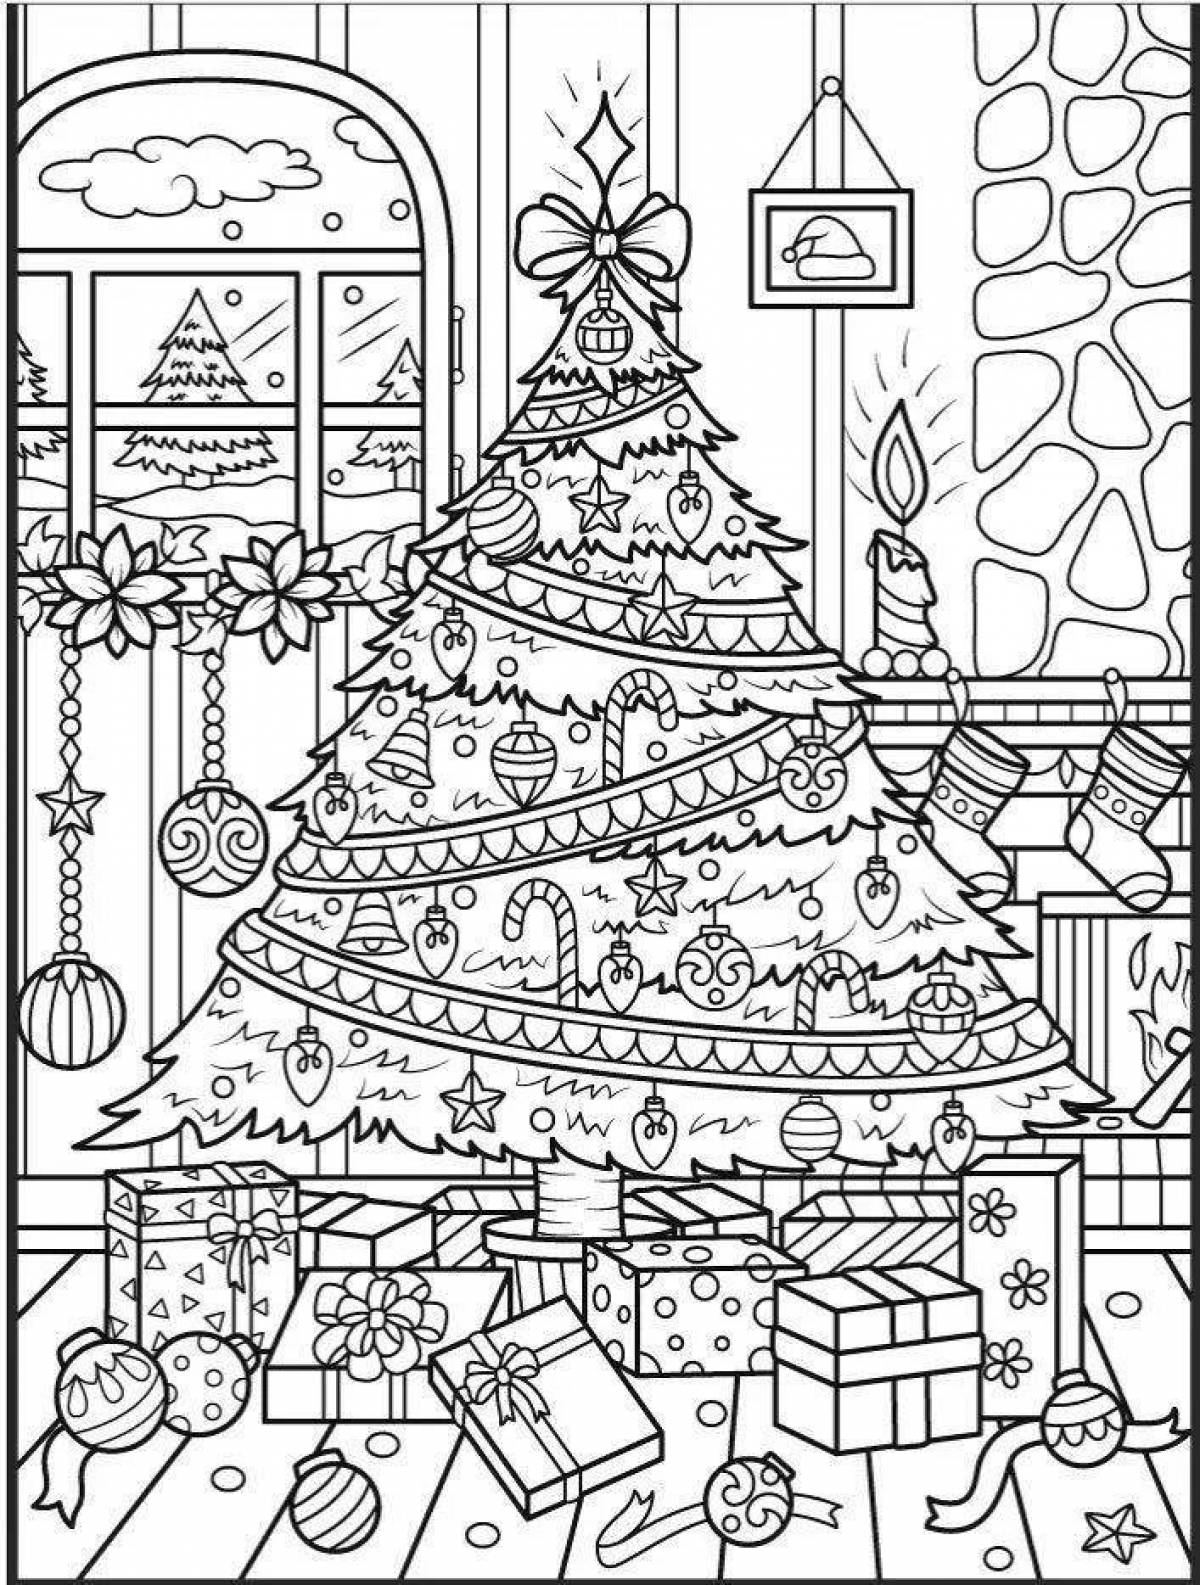 Playful giant Christmas coloring book